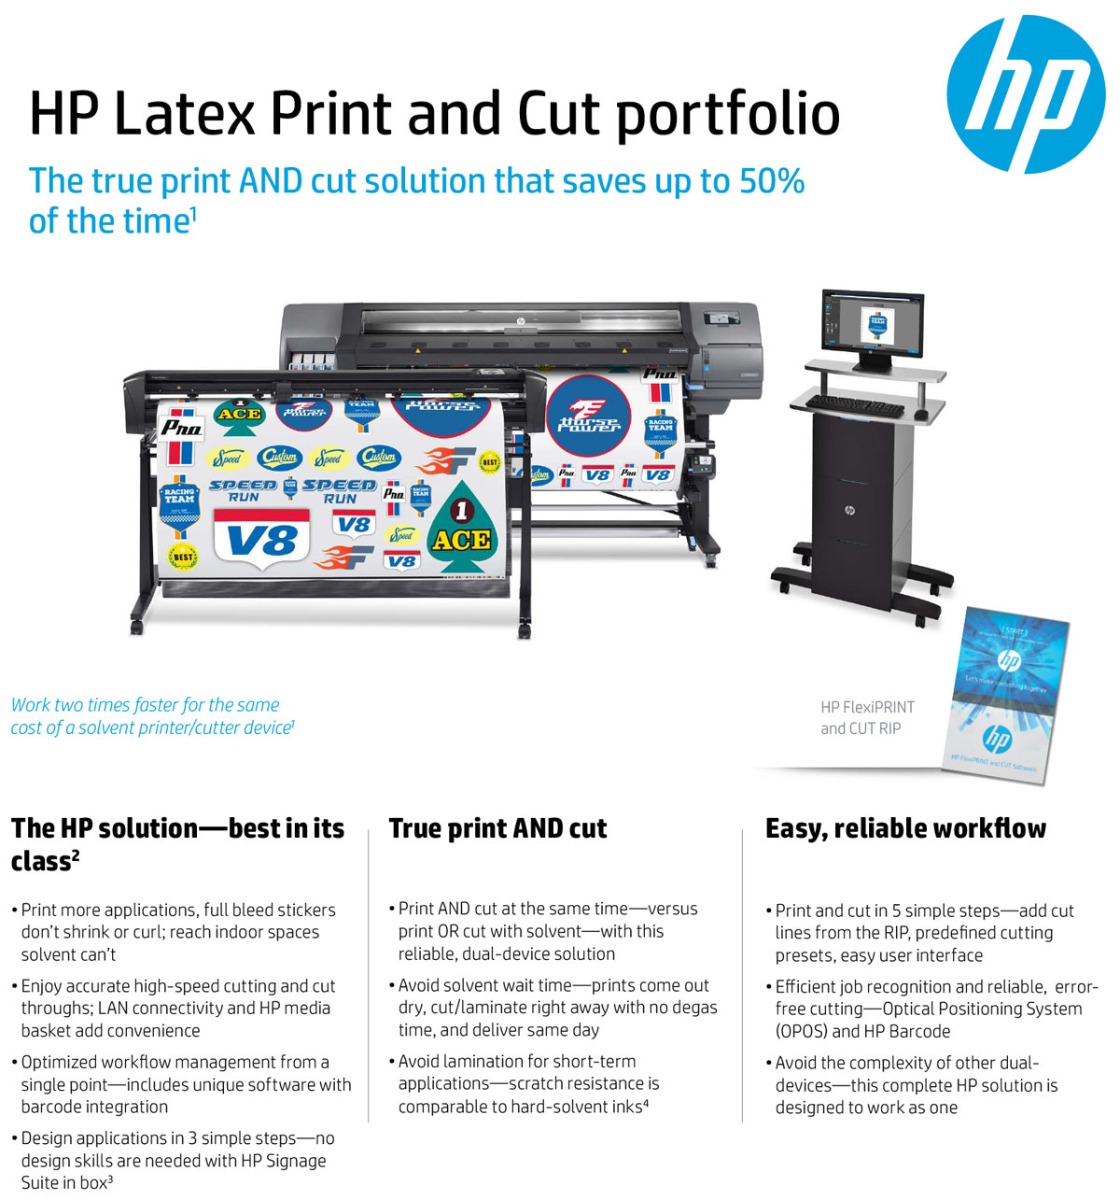 hp latex 315 print and cut solution features including print and cut at same time signage suite bar code for easy setup print and cut in 5 steps opos optical system